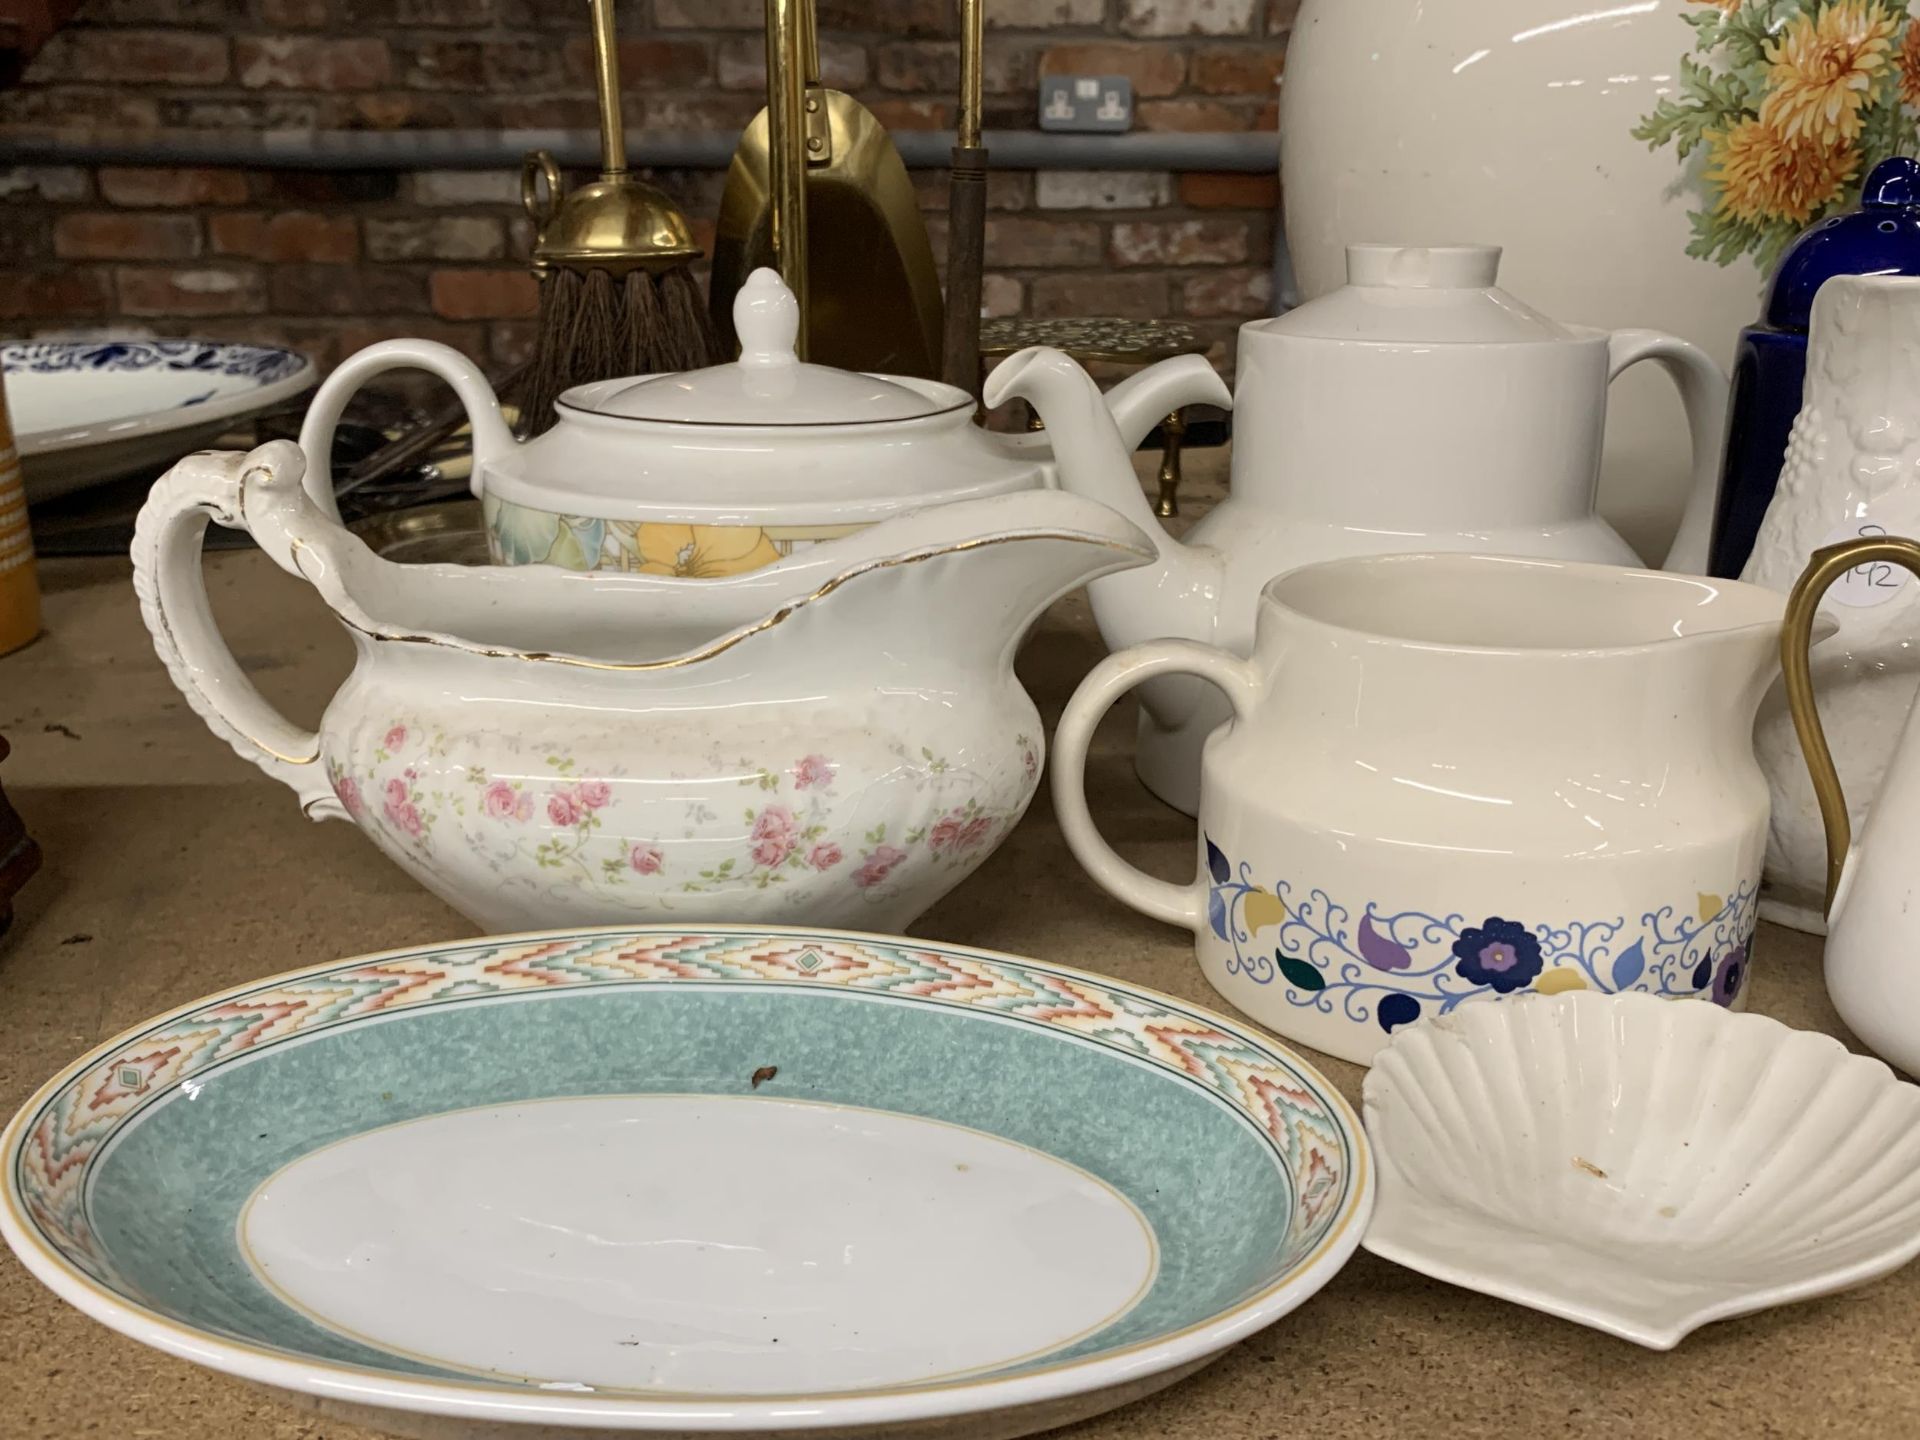 A QUANTITY OF CERAMIC ITEMS TO INCLUDE SAUCE BOATS, JUGS, TEAPOTS, ETC - Image 3 of 4